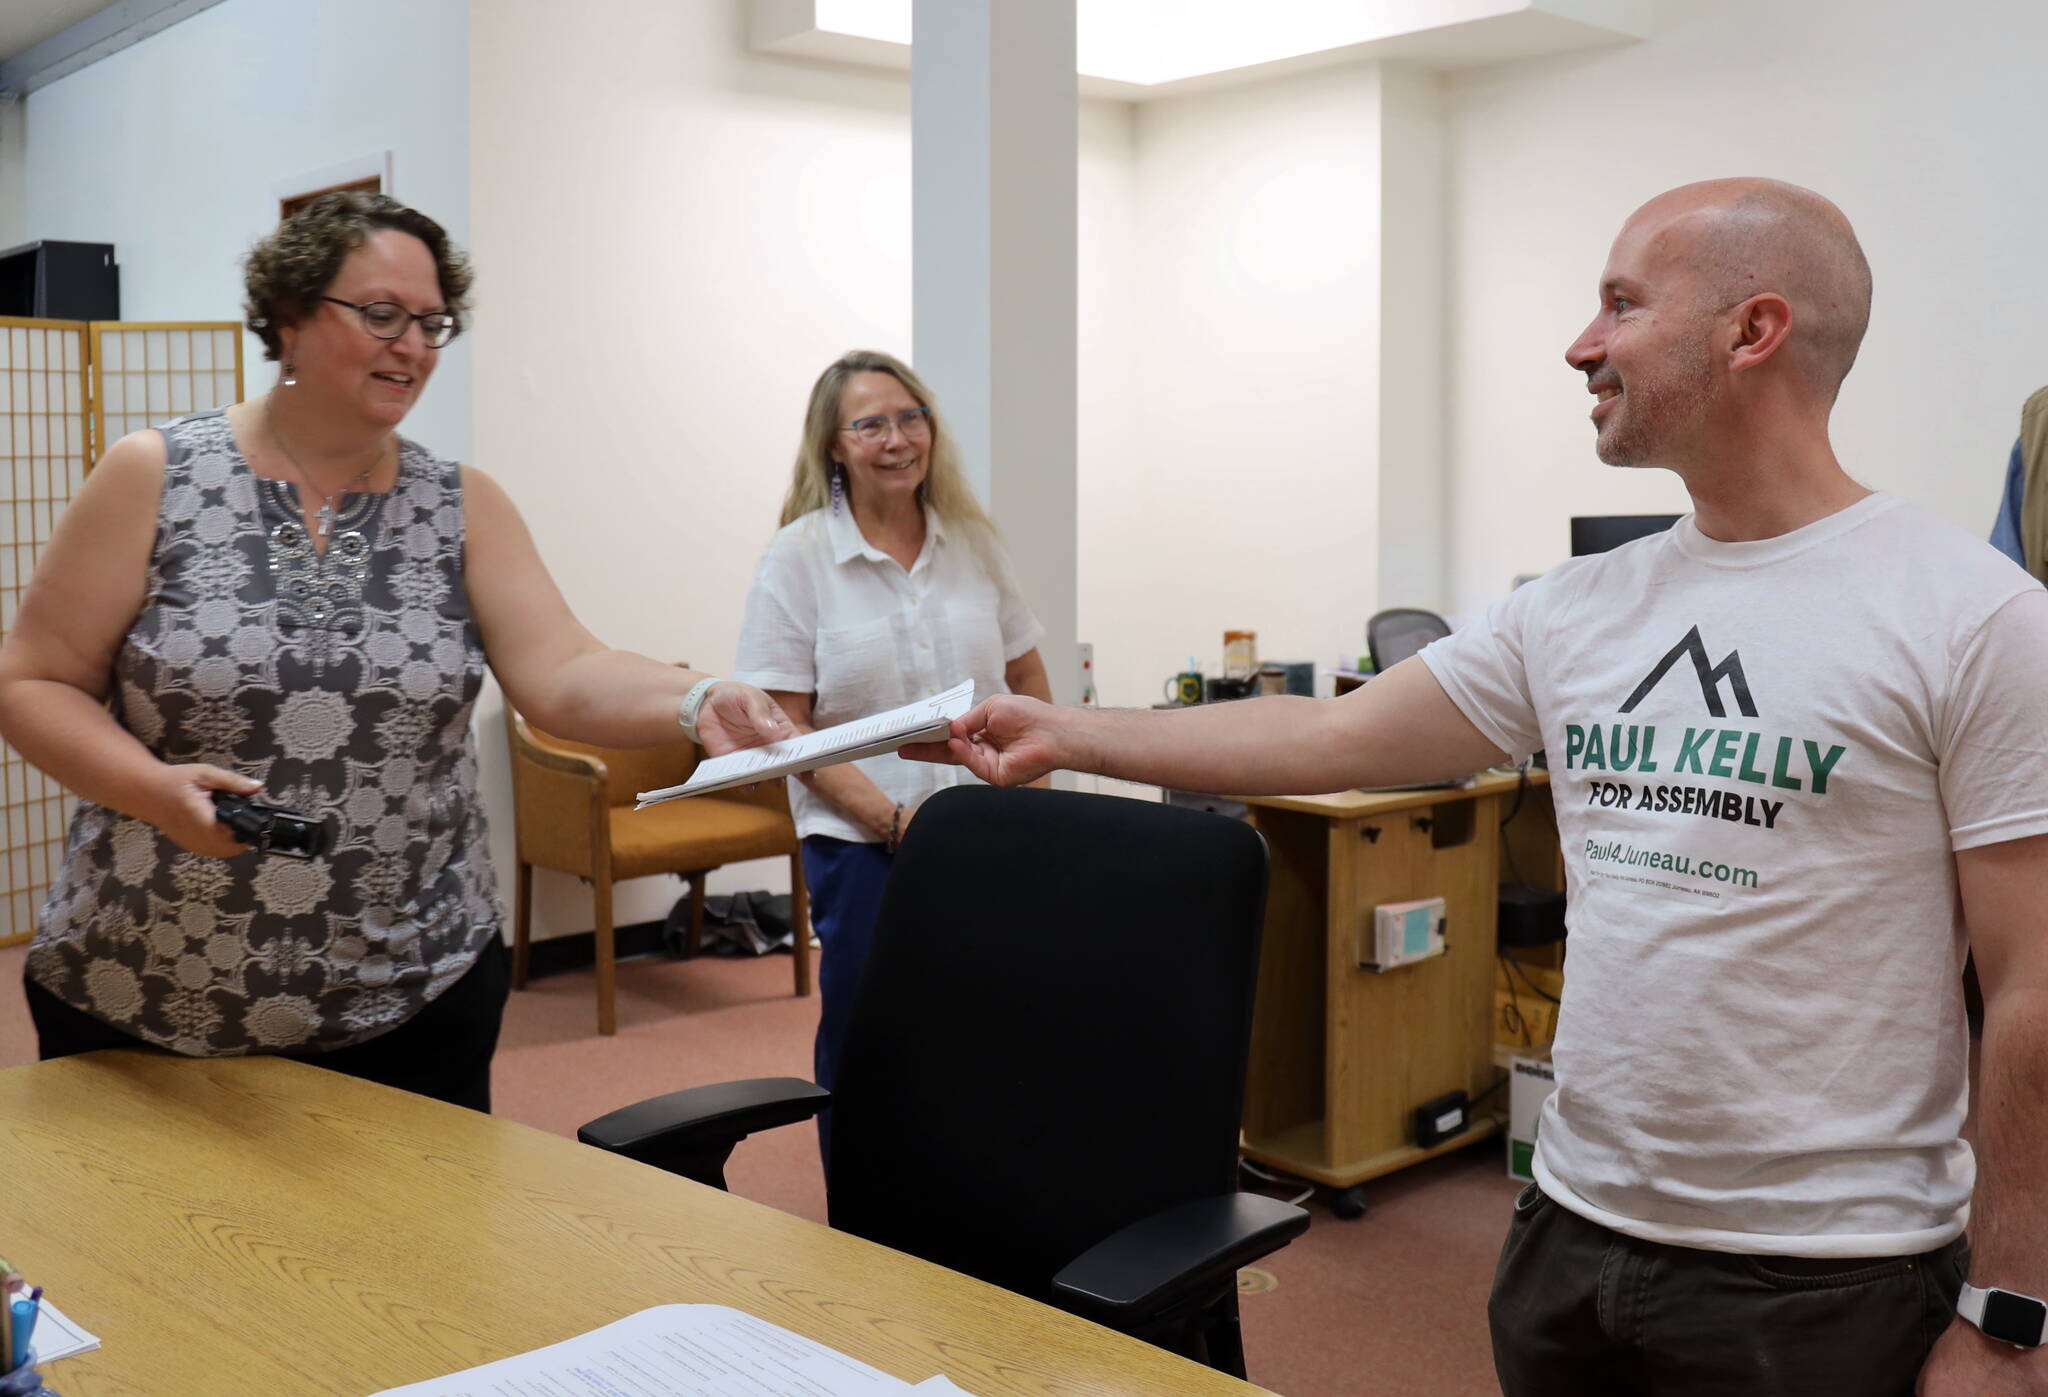 City and Borough of Juneau resident Paul Kelly hands his candidacy forms to City Clerk Beth McEwen within minutes of the local election filing period opening on Friday. Kelly is running for one of the two areawide seats open on the Assembly. (Clarise Larson / Juneau Empire)